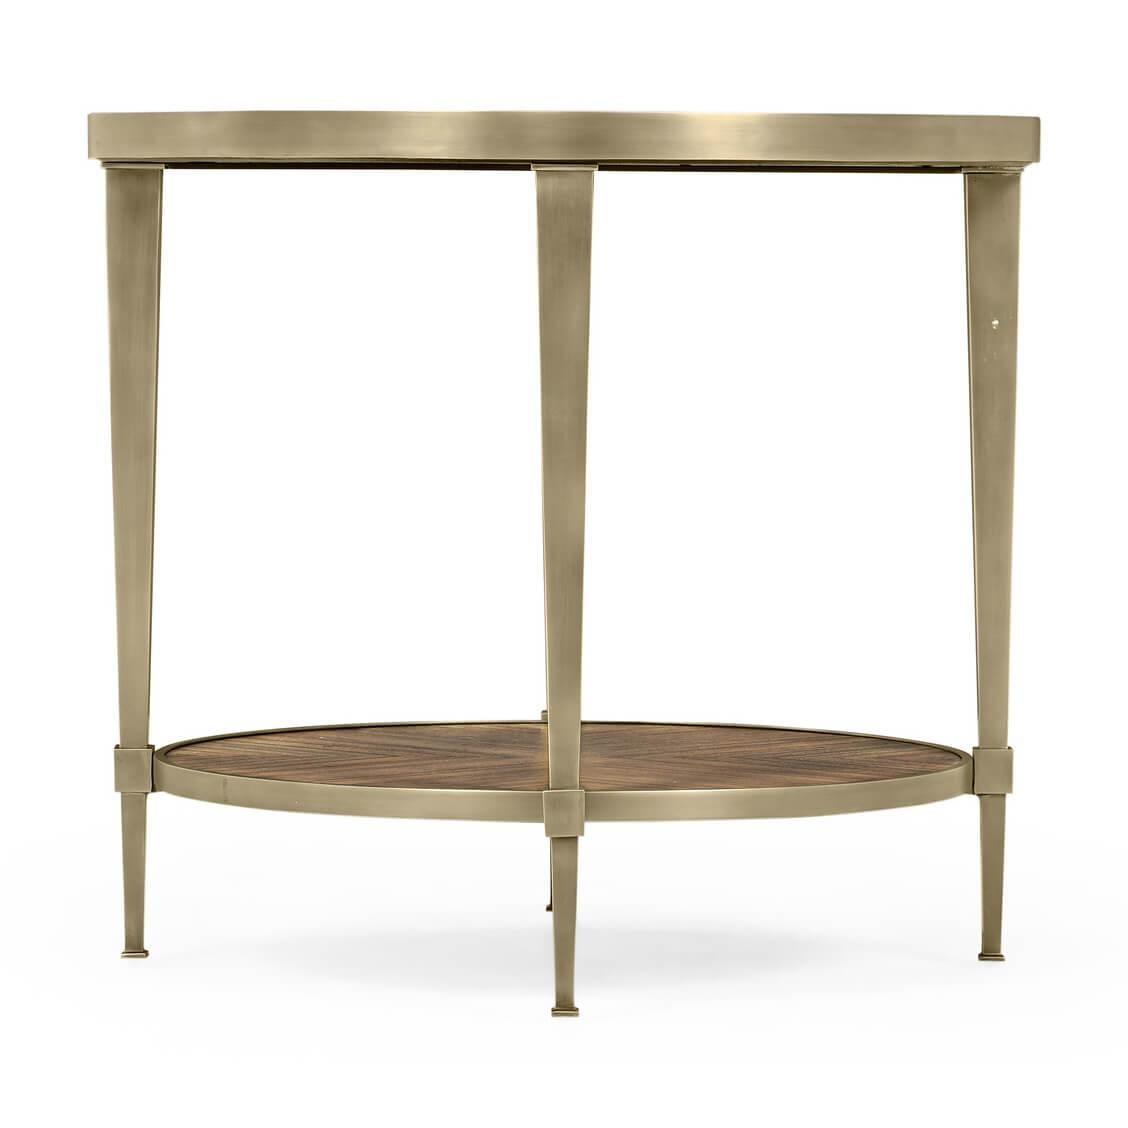 An Art Deco-inspired golden amber brass and quartered veneered two - tier lamp table with brass edge and square tapered supports, with a lower shelf stretcher base.

Dimensions: 27